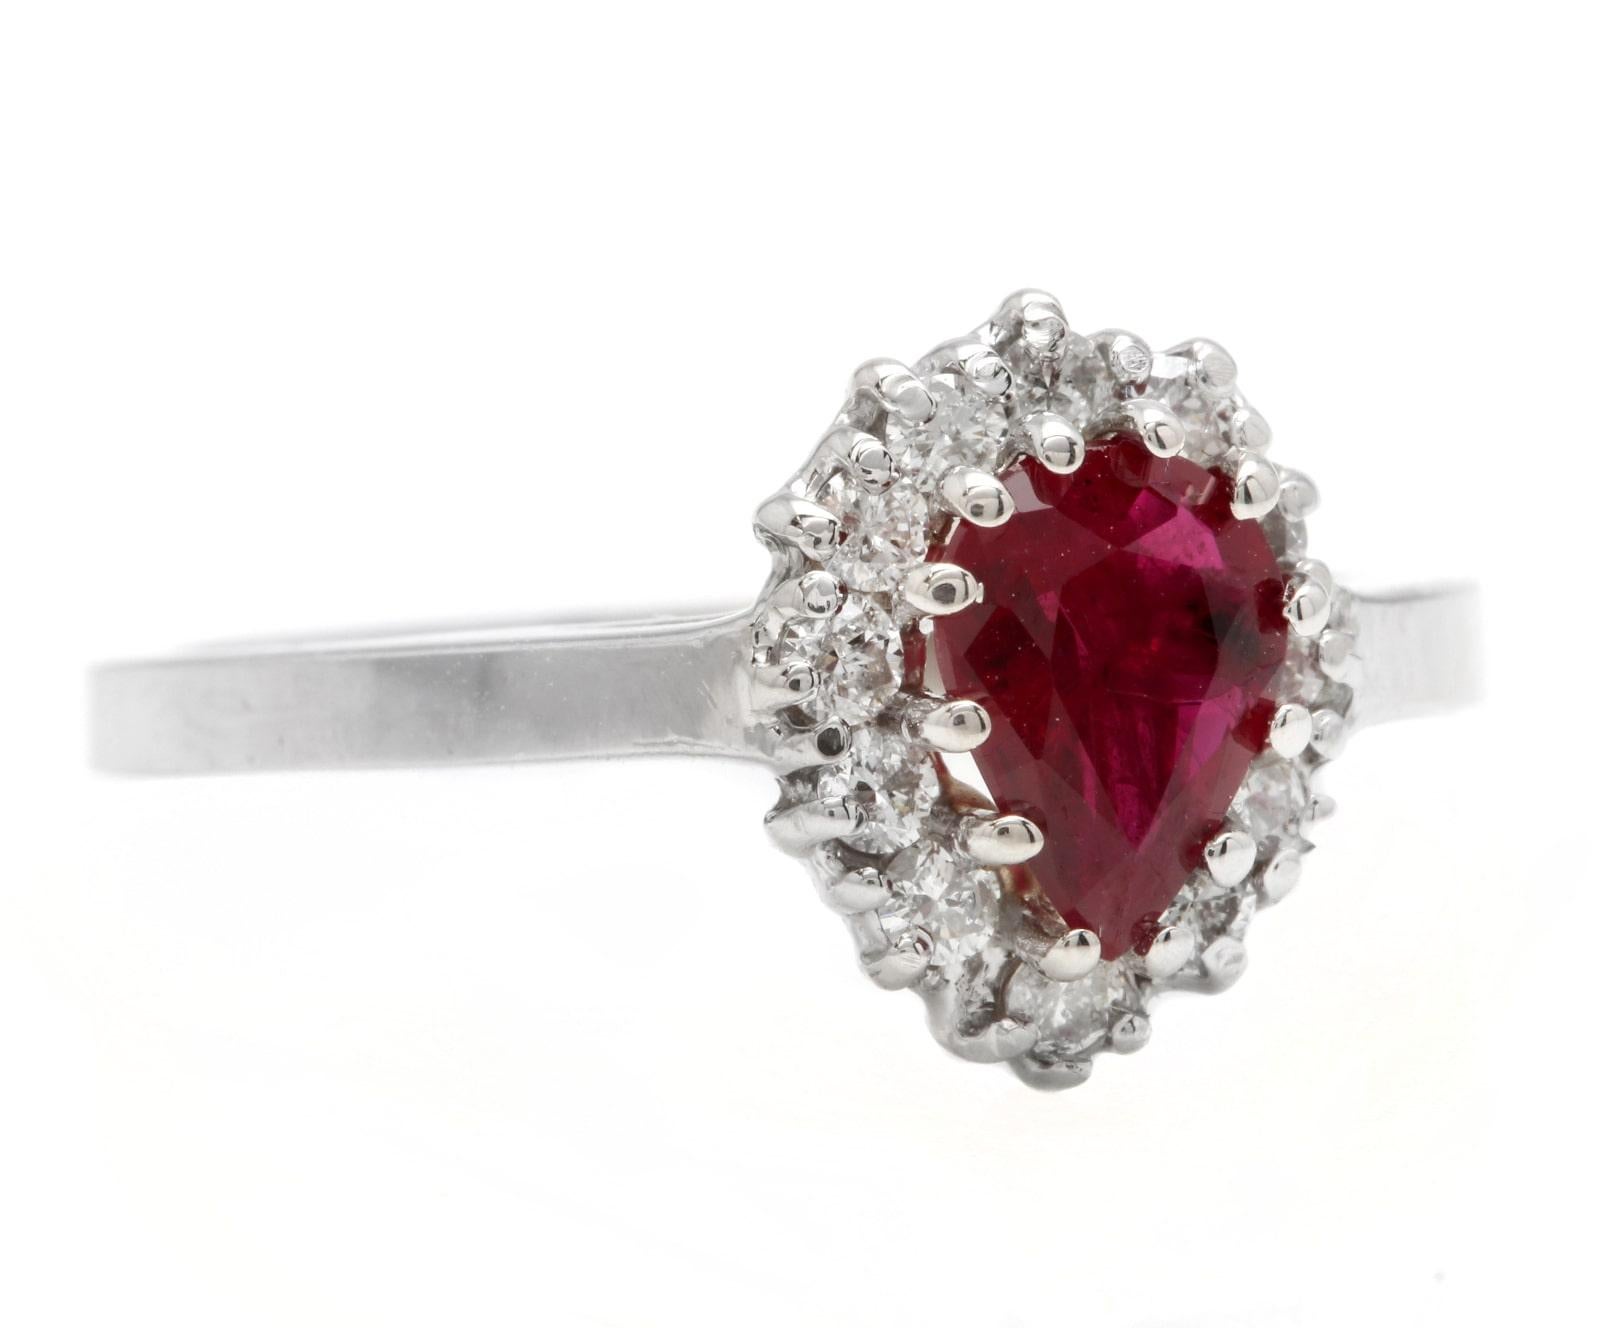 1.10Ct Natural Untreated Ruby and Natural Diamond 14K White Gold Ring

Suggested Replacement Value: Approx. $2500.00

Ruby Treatment: Untreated 

Total Pear Ruby Weight is: Approx. 0.80ct

Ruby Measures: 7 x 5mm

Natural Round Diamonds Weight: